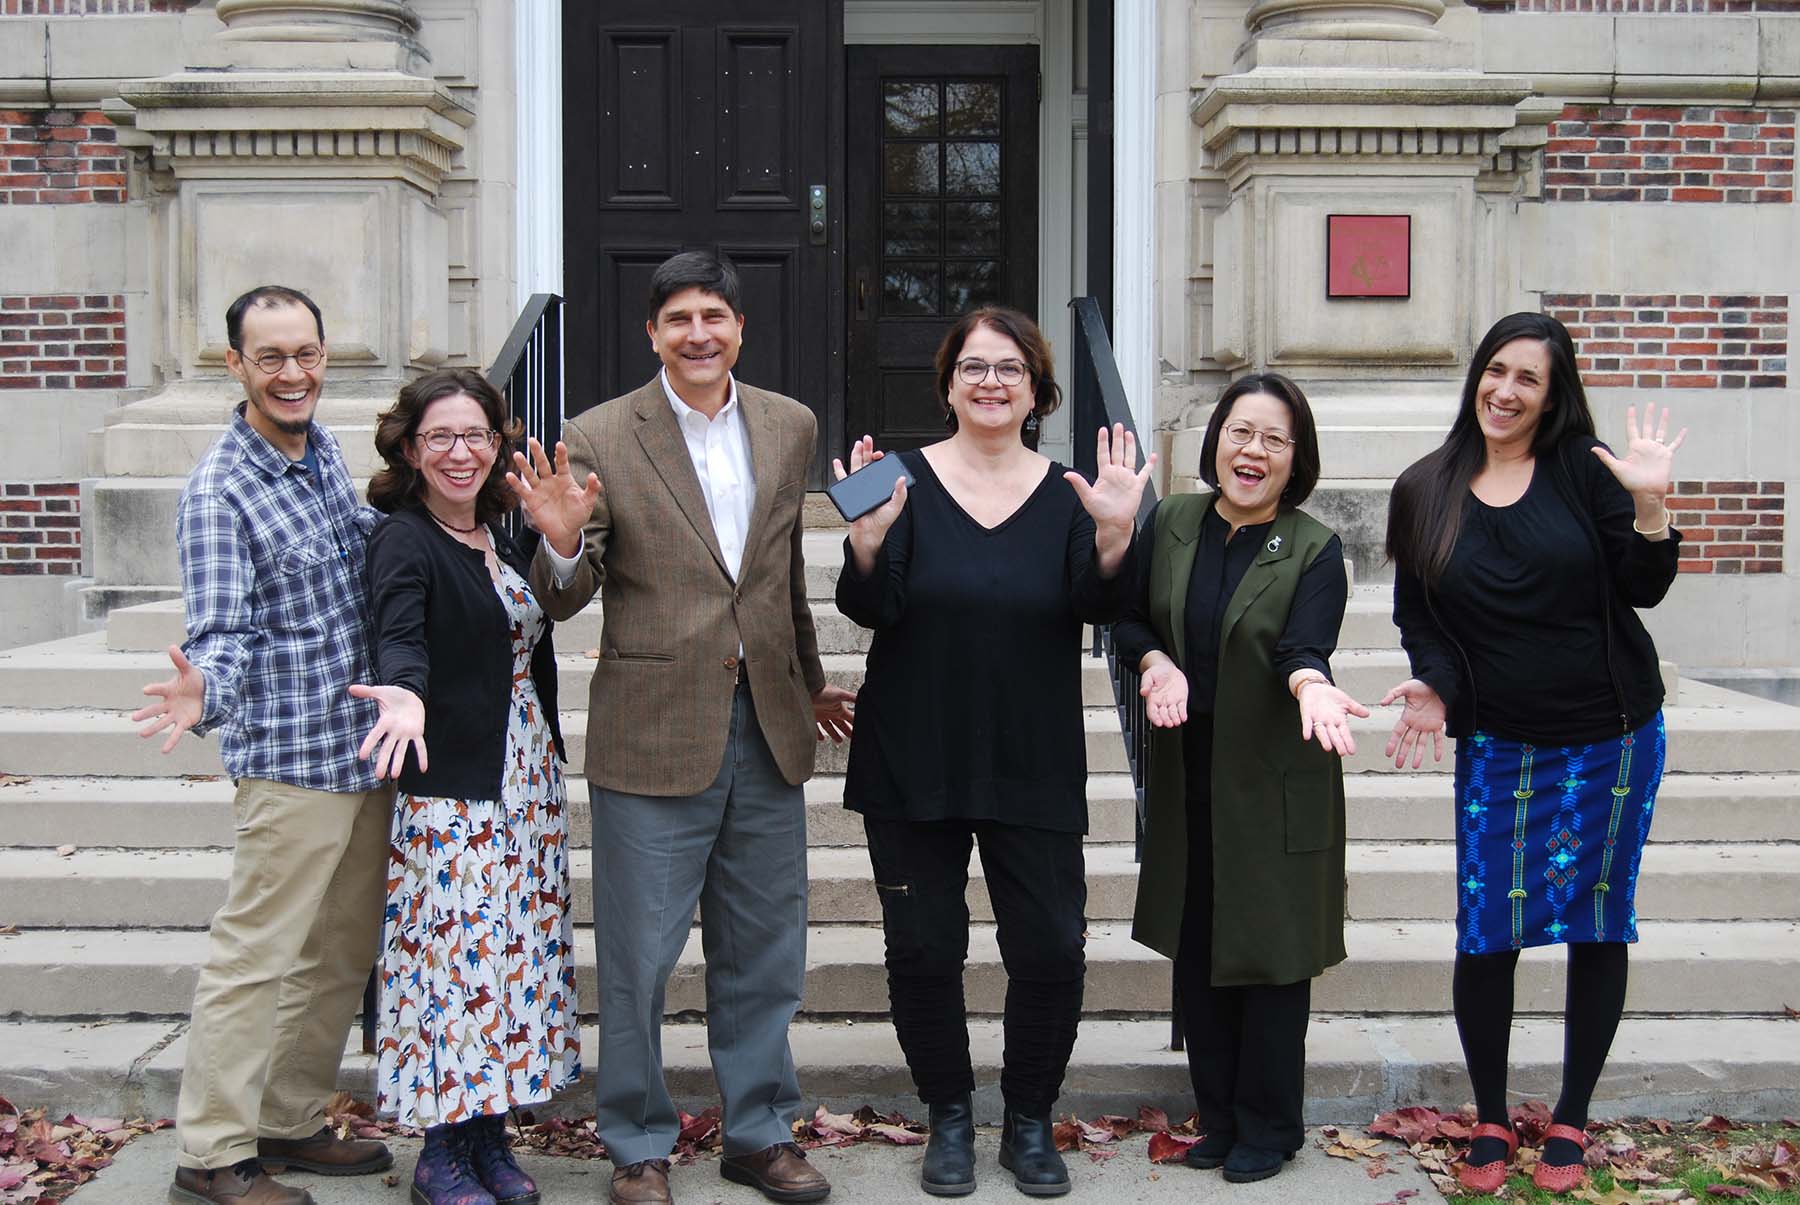 Group photo of Justin Patch, Dara Greenwood, Ron Patkus, Paulina Bren, Hiromi Dollase, Sole Anatrone standing in front of steps of a building.